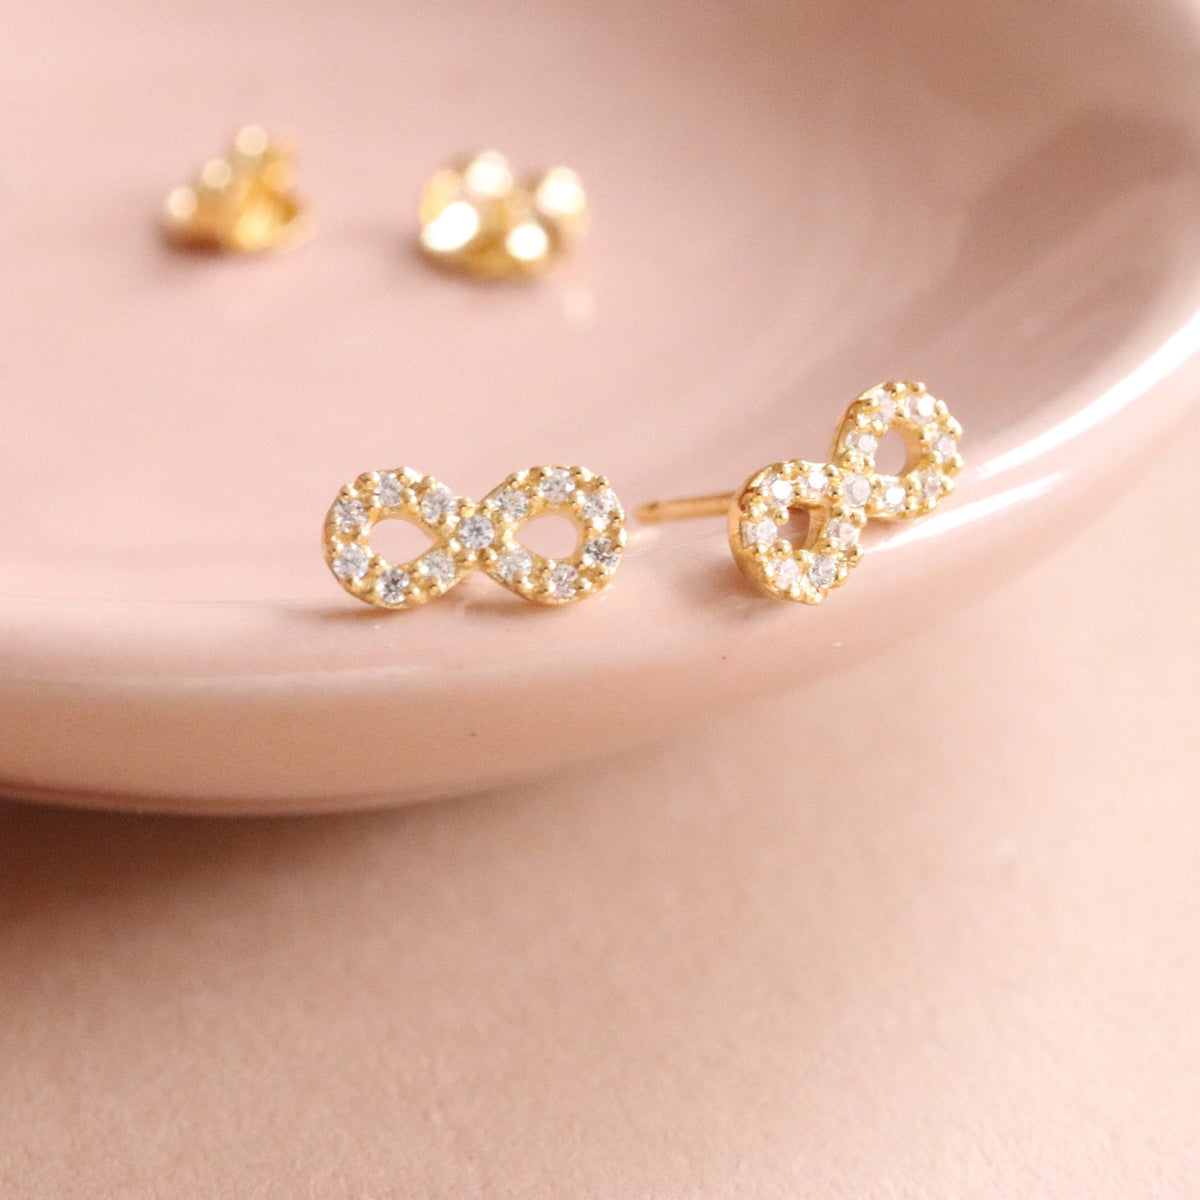 LOVE INFINITY STUDS - CUBIC ZIRCONIA &amp; GOLD - SO PRETTY CARA COTTER